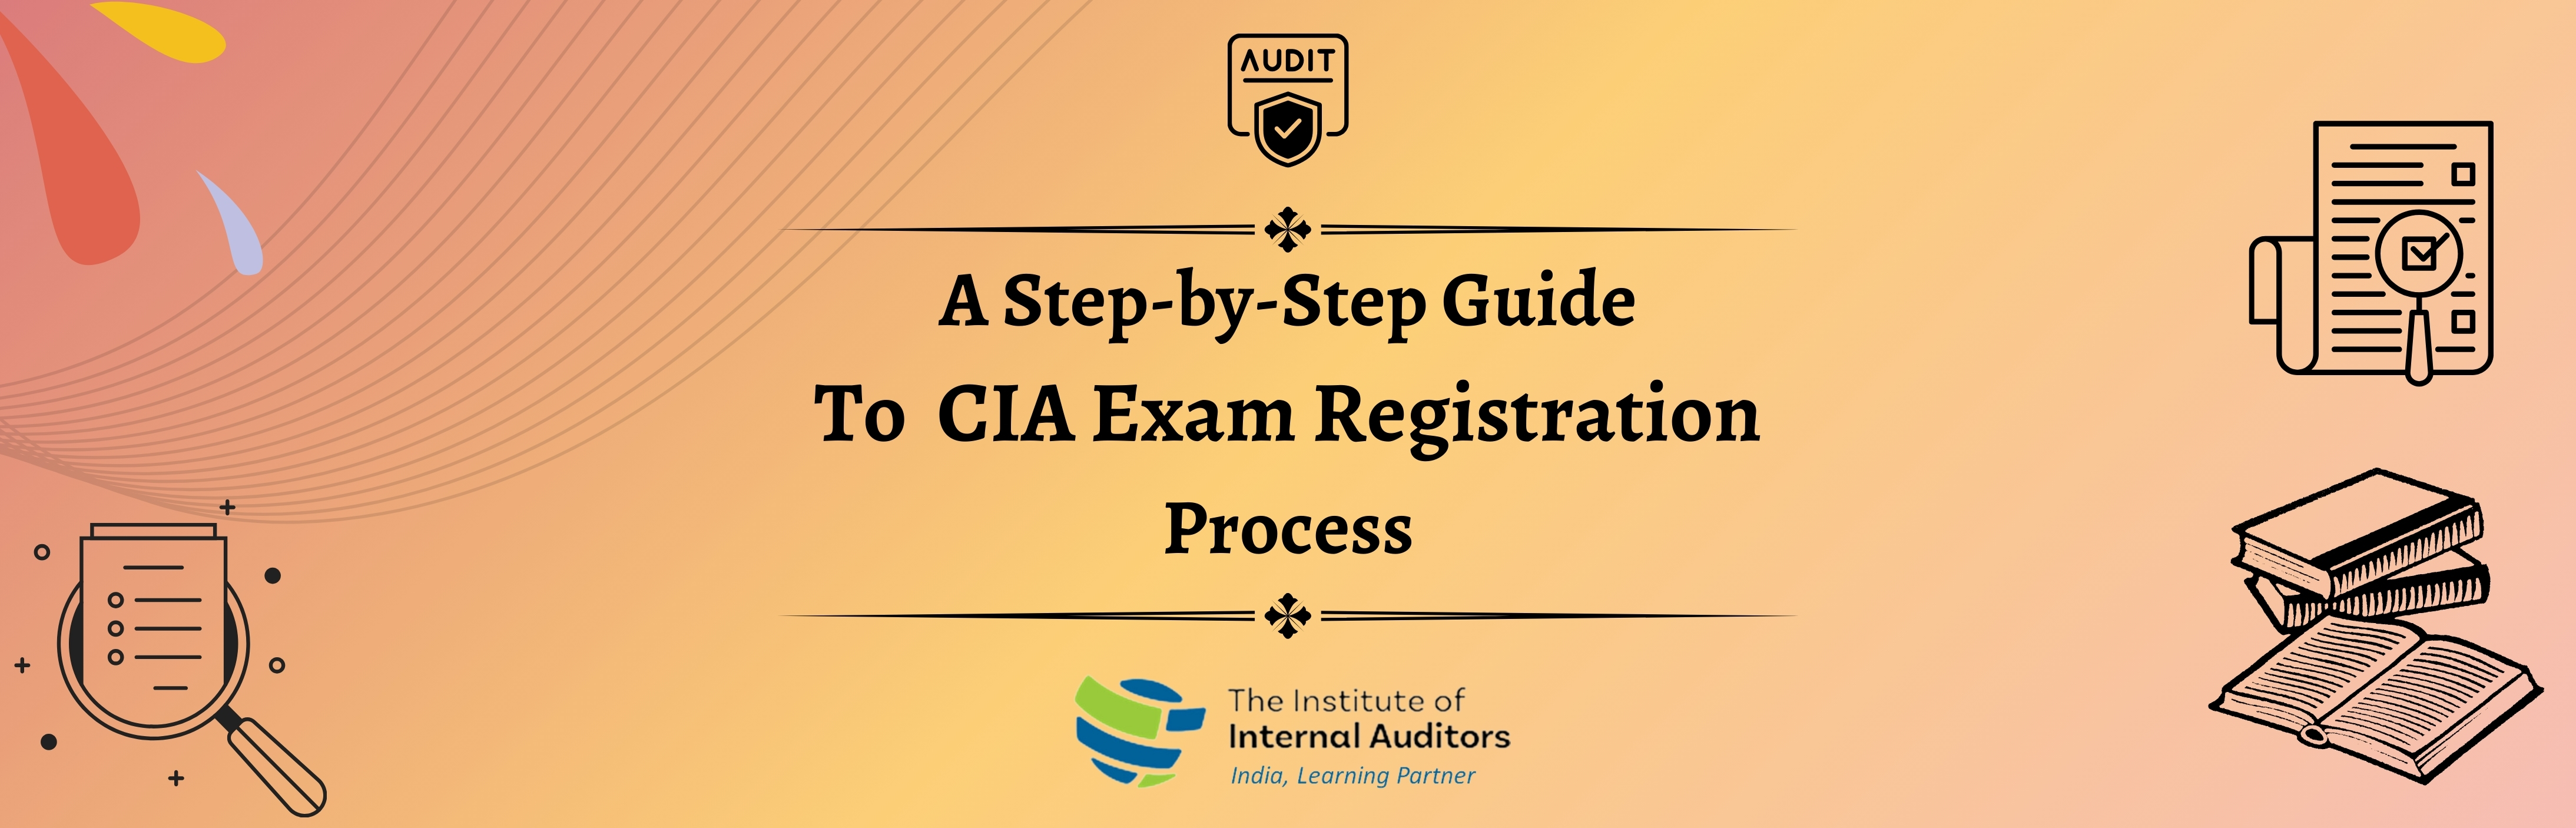 A Step-by-Step Guide To The CIA Exam Registration Process